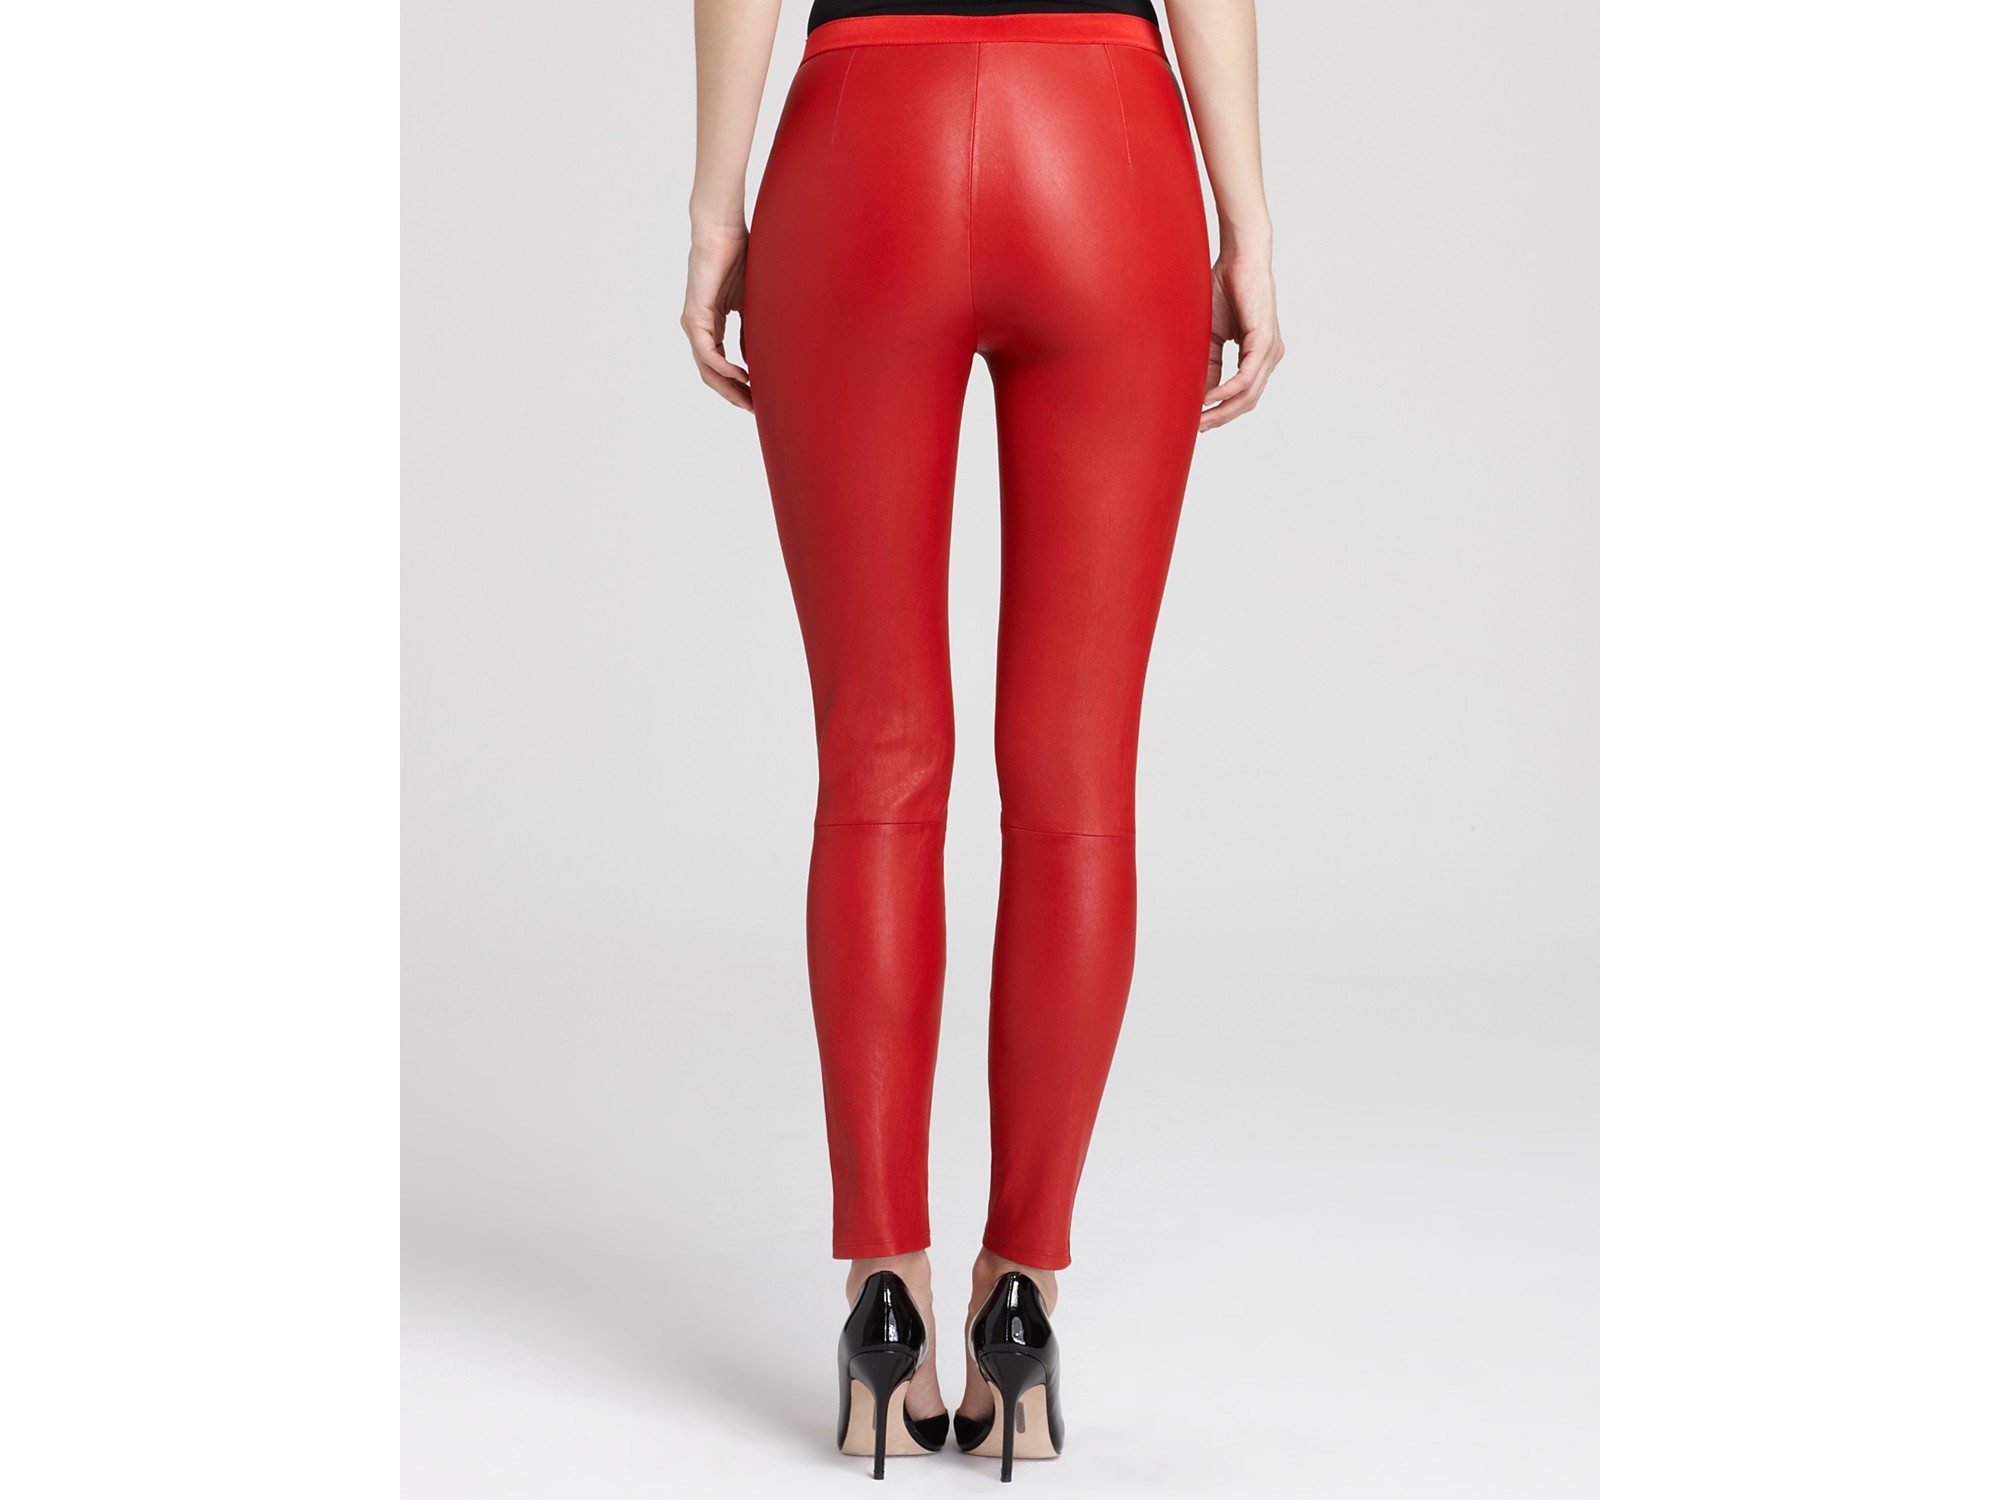 Lyst - Catherine malandrino Stretch Leather Pants with Knee Seams in Red